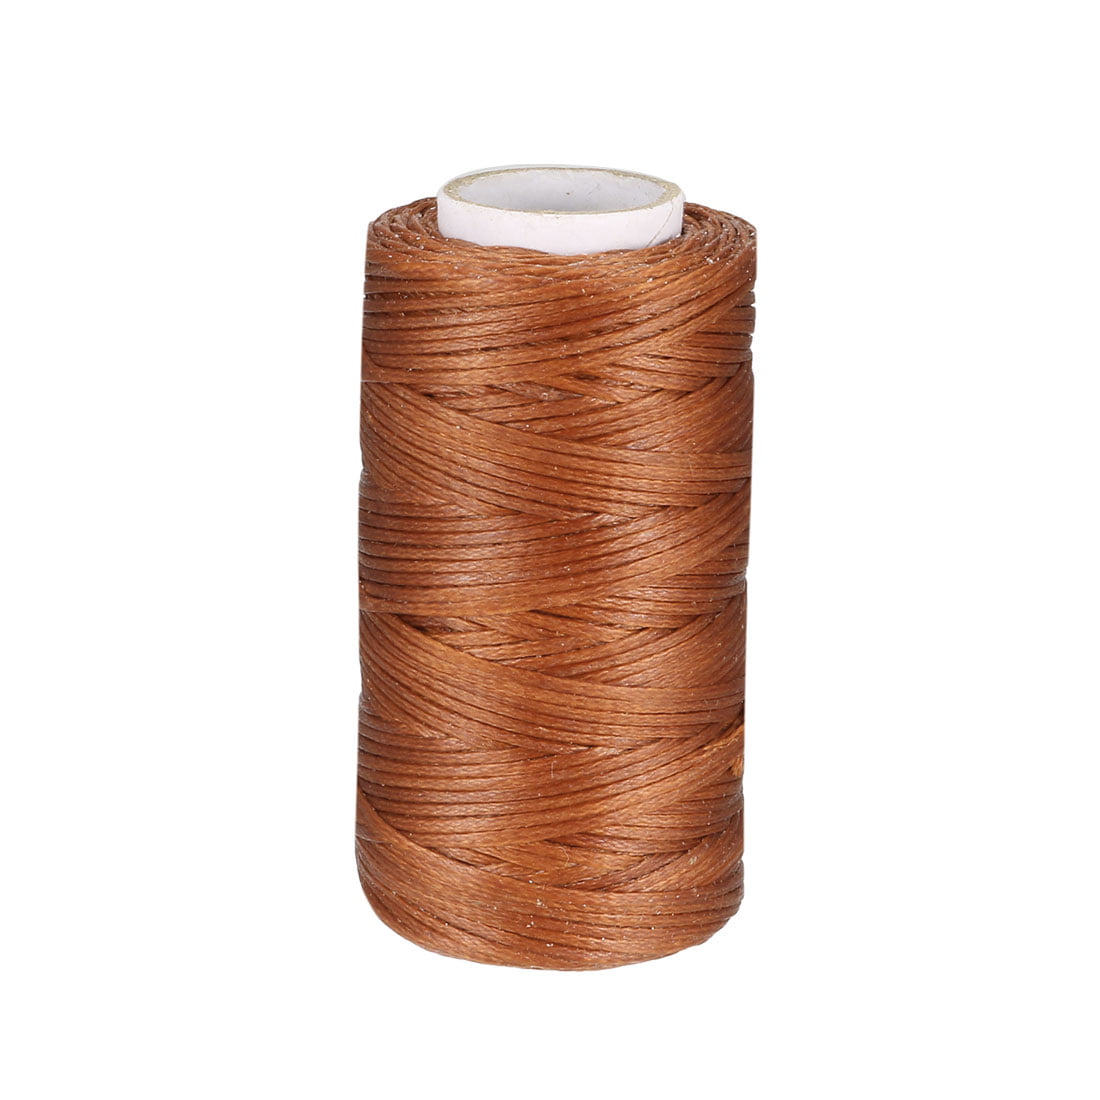 0.8mm 78m/Roll Leather Hand Sewing Waxed Thread Hand Stitching Cord Craft Tool 